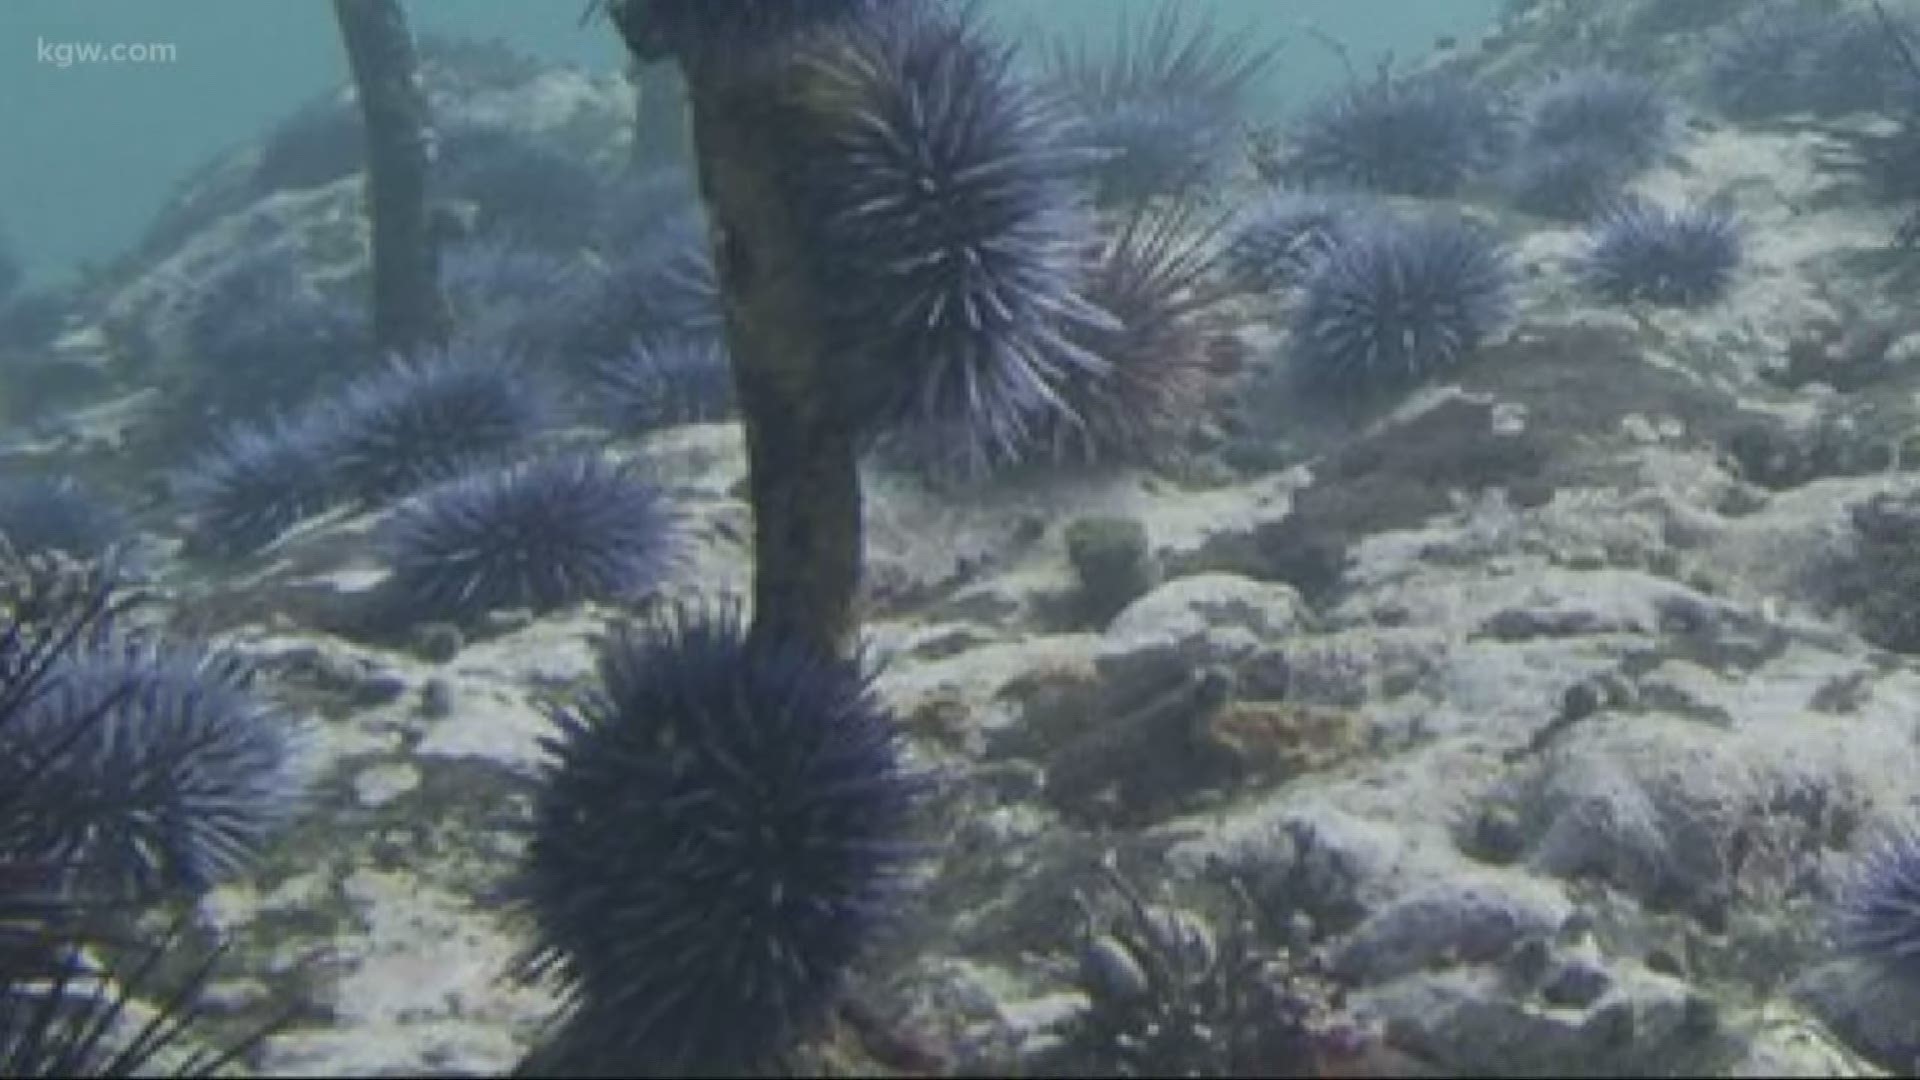 Purple sea urchins are taking over. What the colorful urchins’ presence in Oregon waters means.